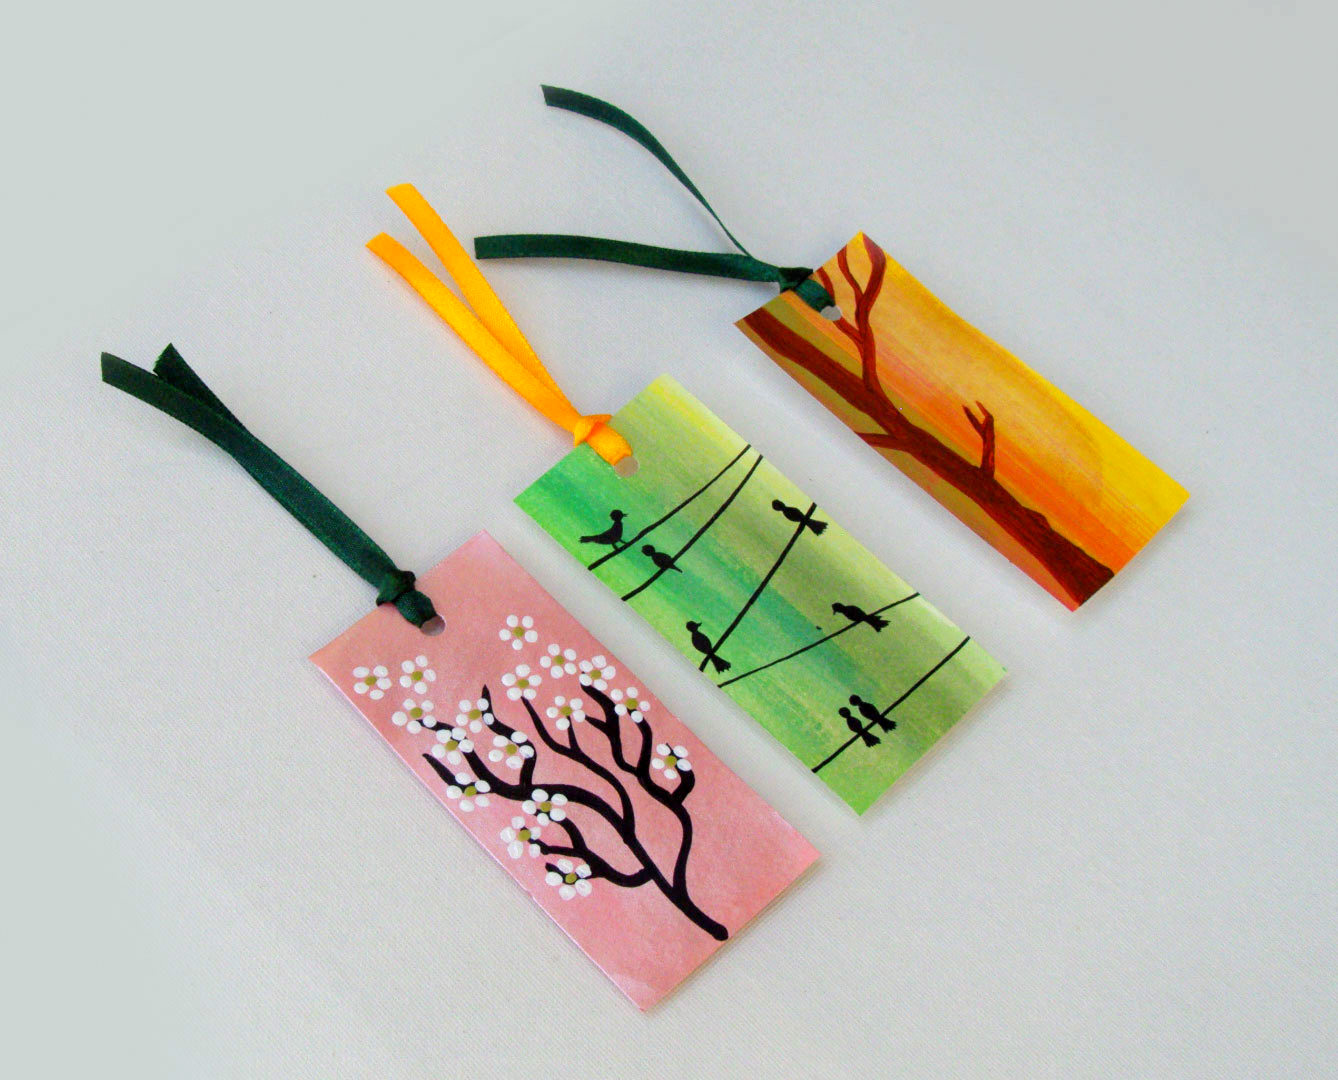 Free Information and News about Handmade Gifts - Handmade Bookmarks - Handmade Gifts India Online - Handmade Giftables for sale